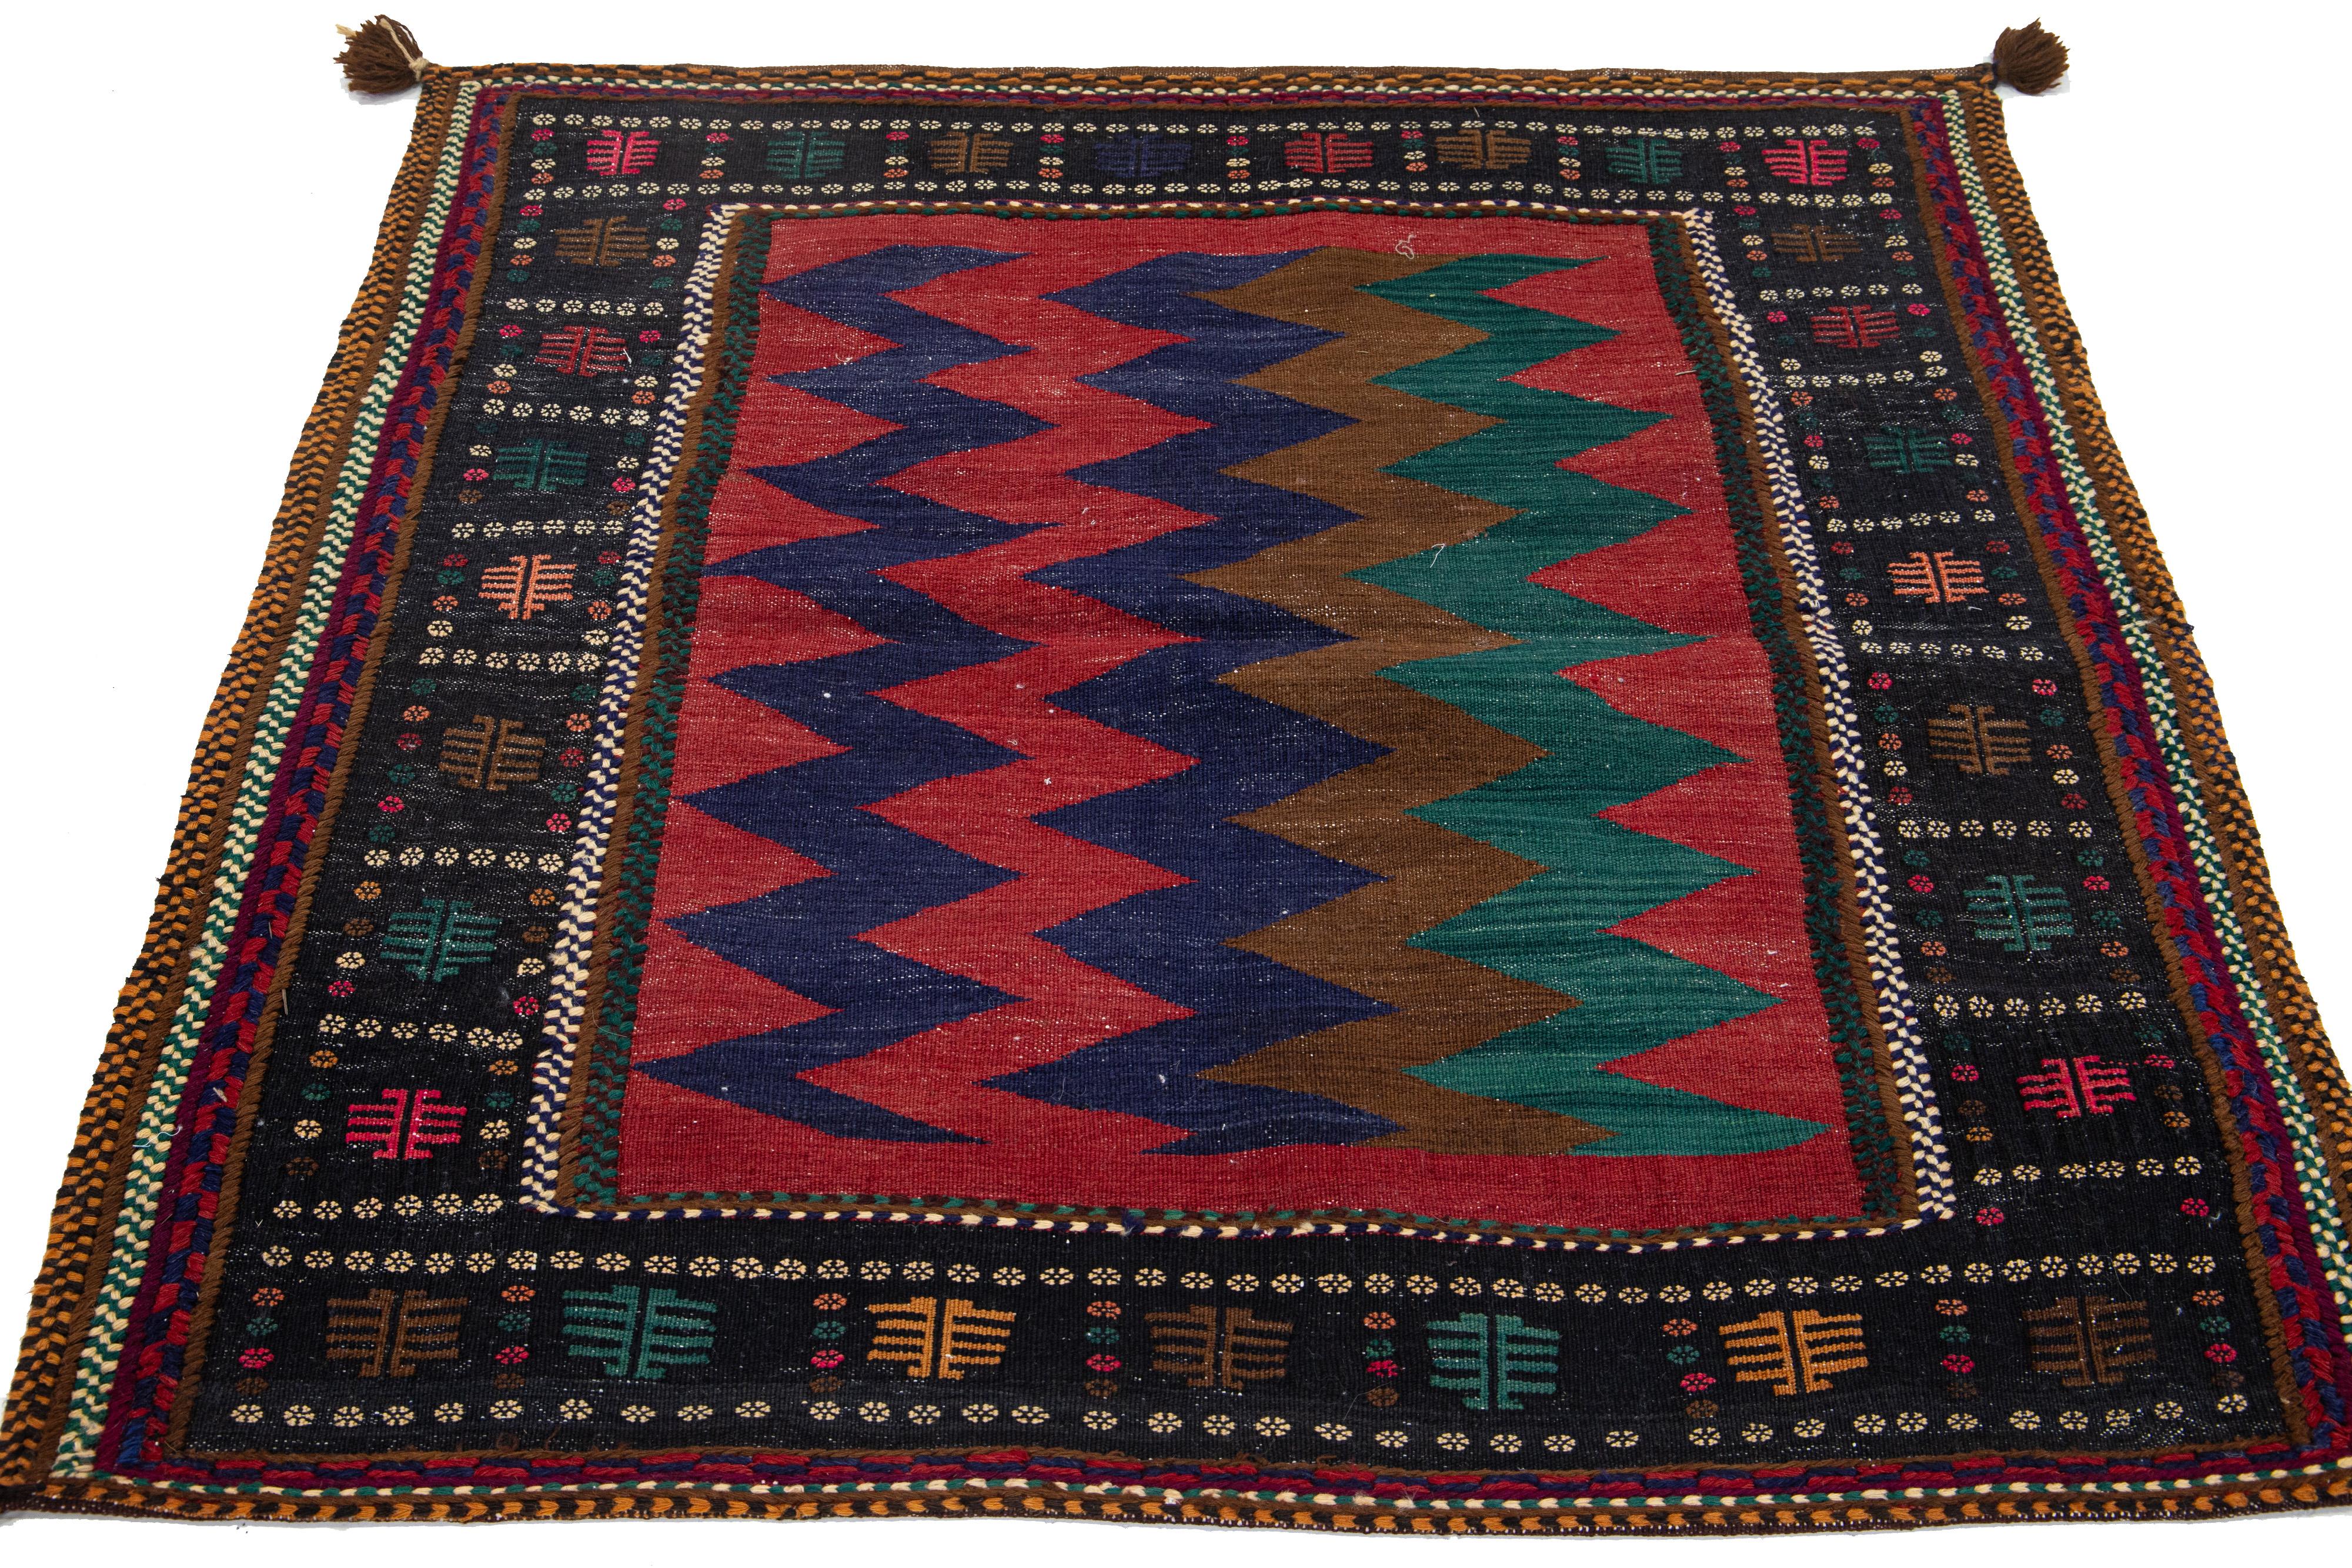 This Persian Shiraz wool rug displays an elaborate tribal design featuring stunning green, blue, and brown accents on a red background.

This rug measures 3'11